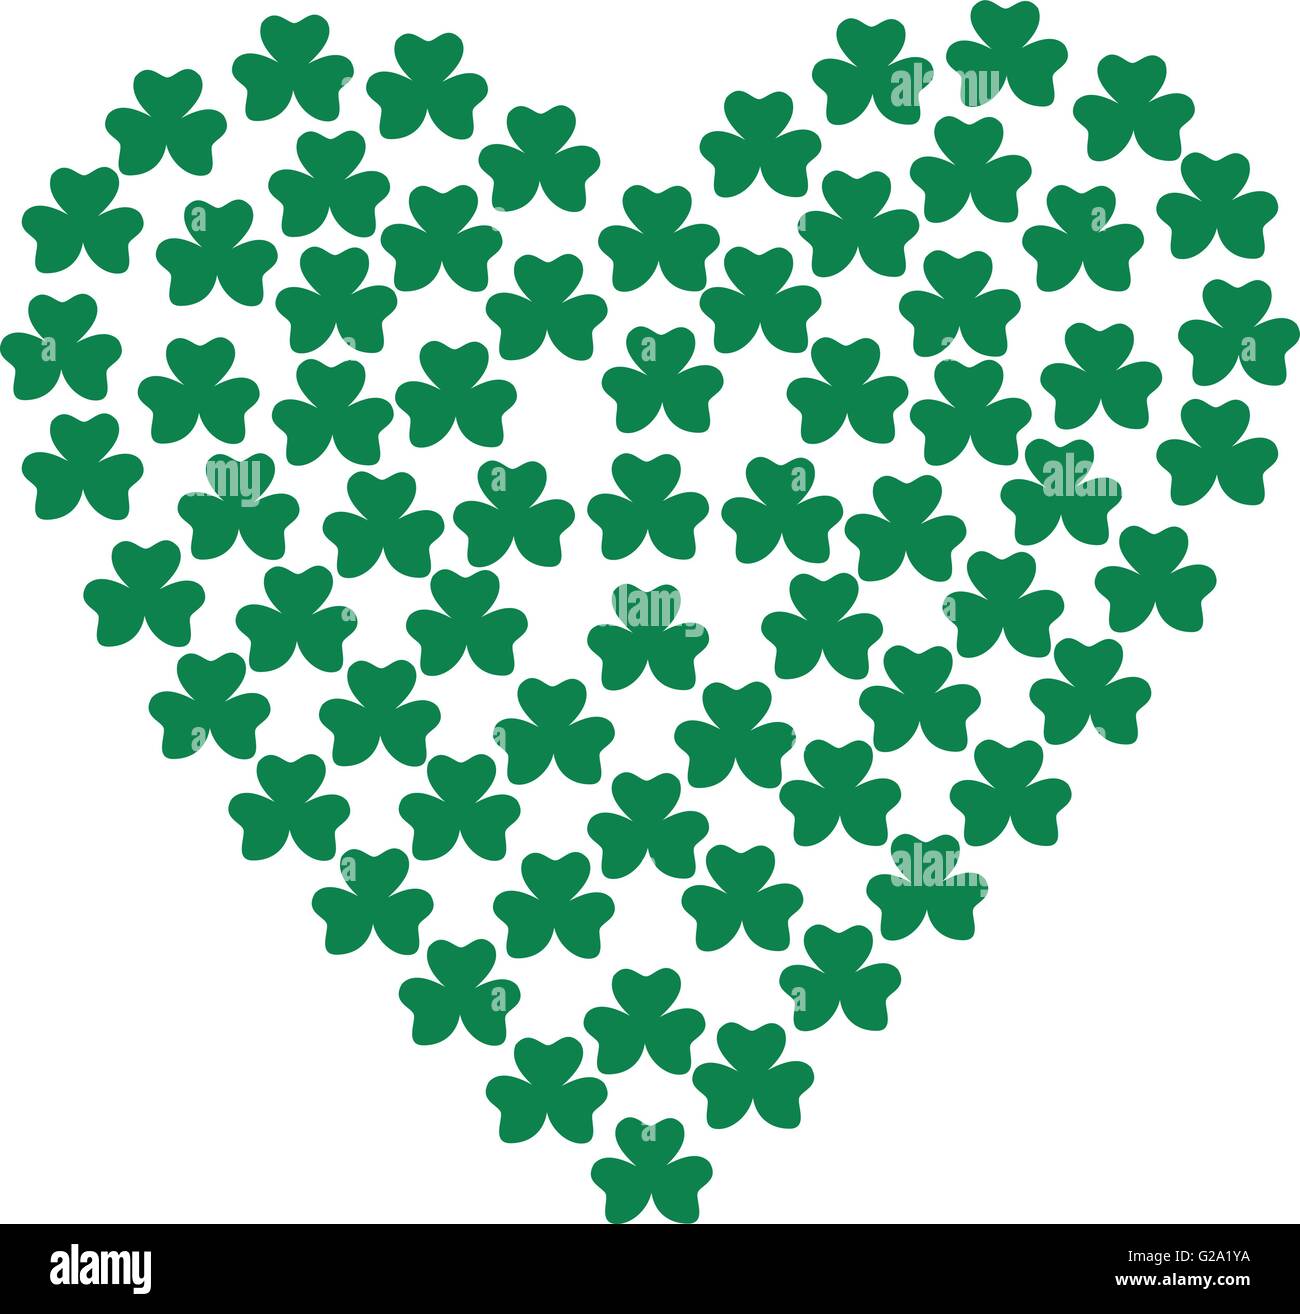 Heart composed with shamrocks - background Stock Vector